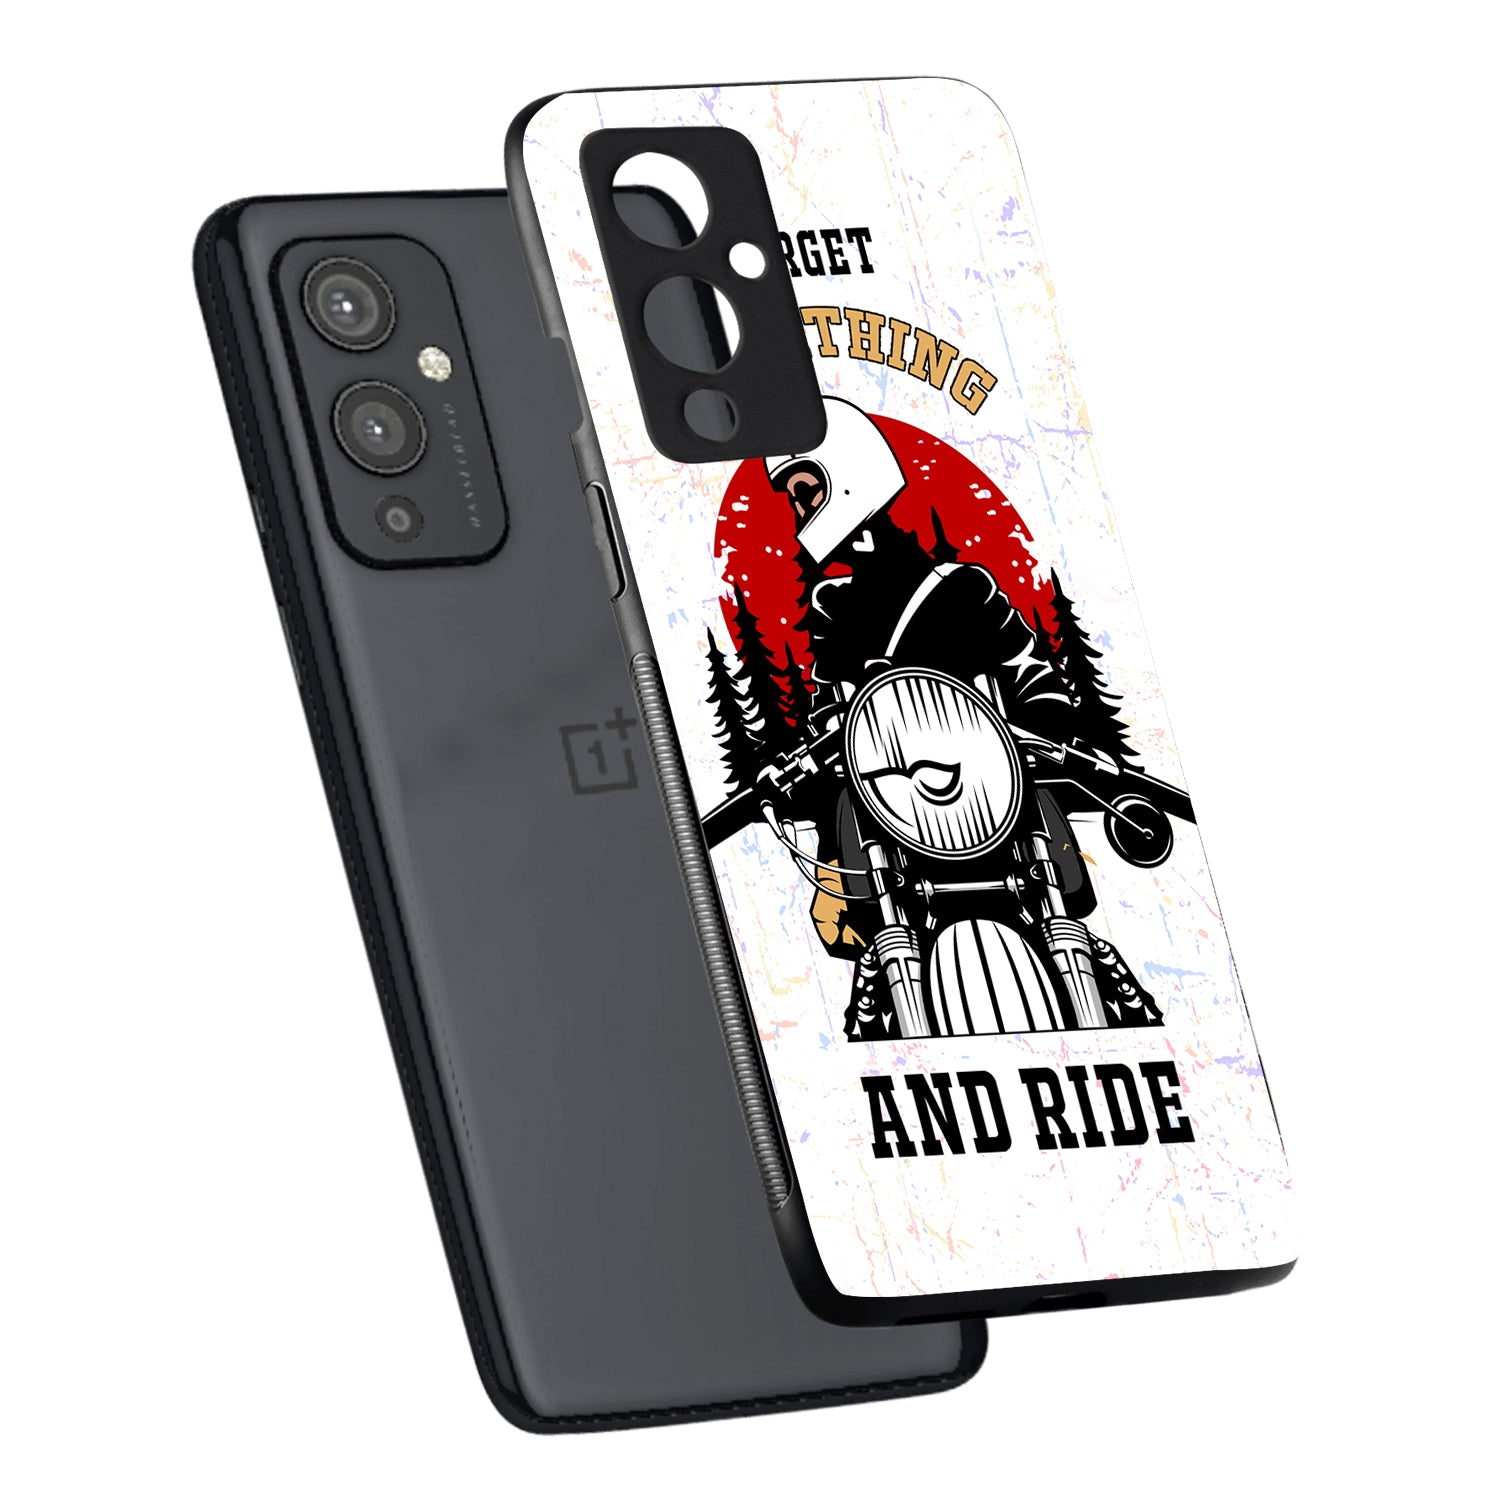 Forget Everything &amp; Ride Bike Oneplus 9 Back Case